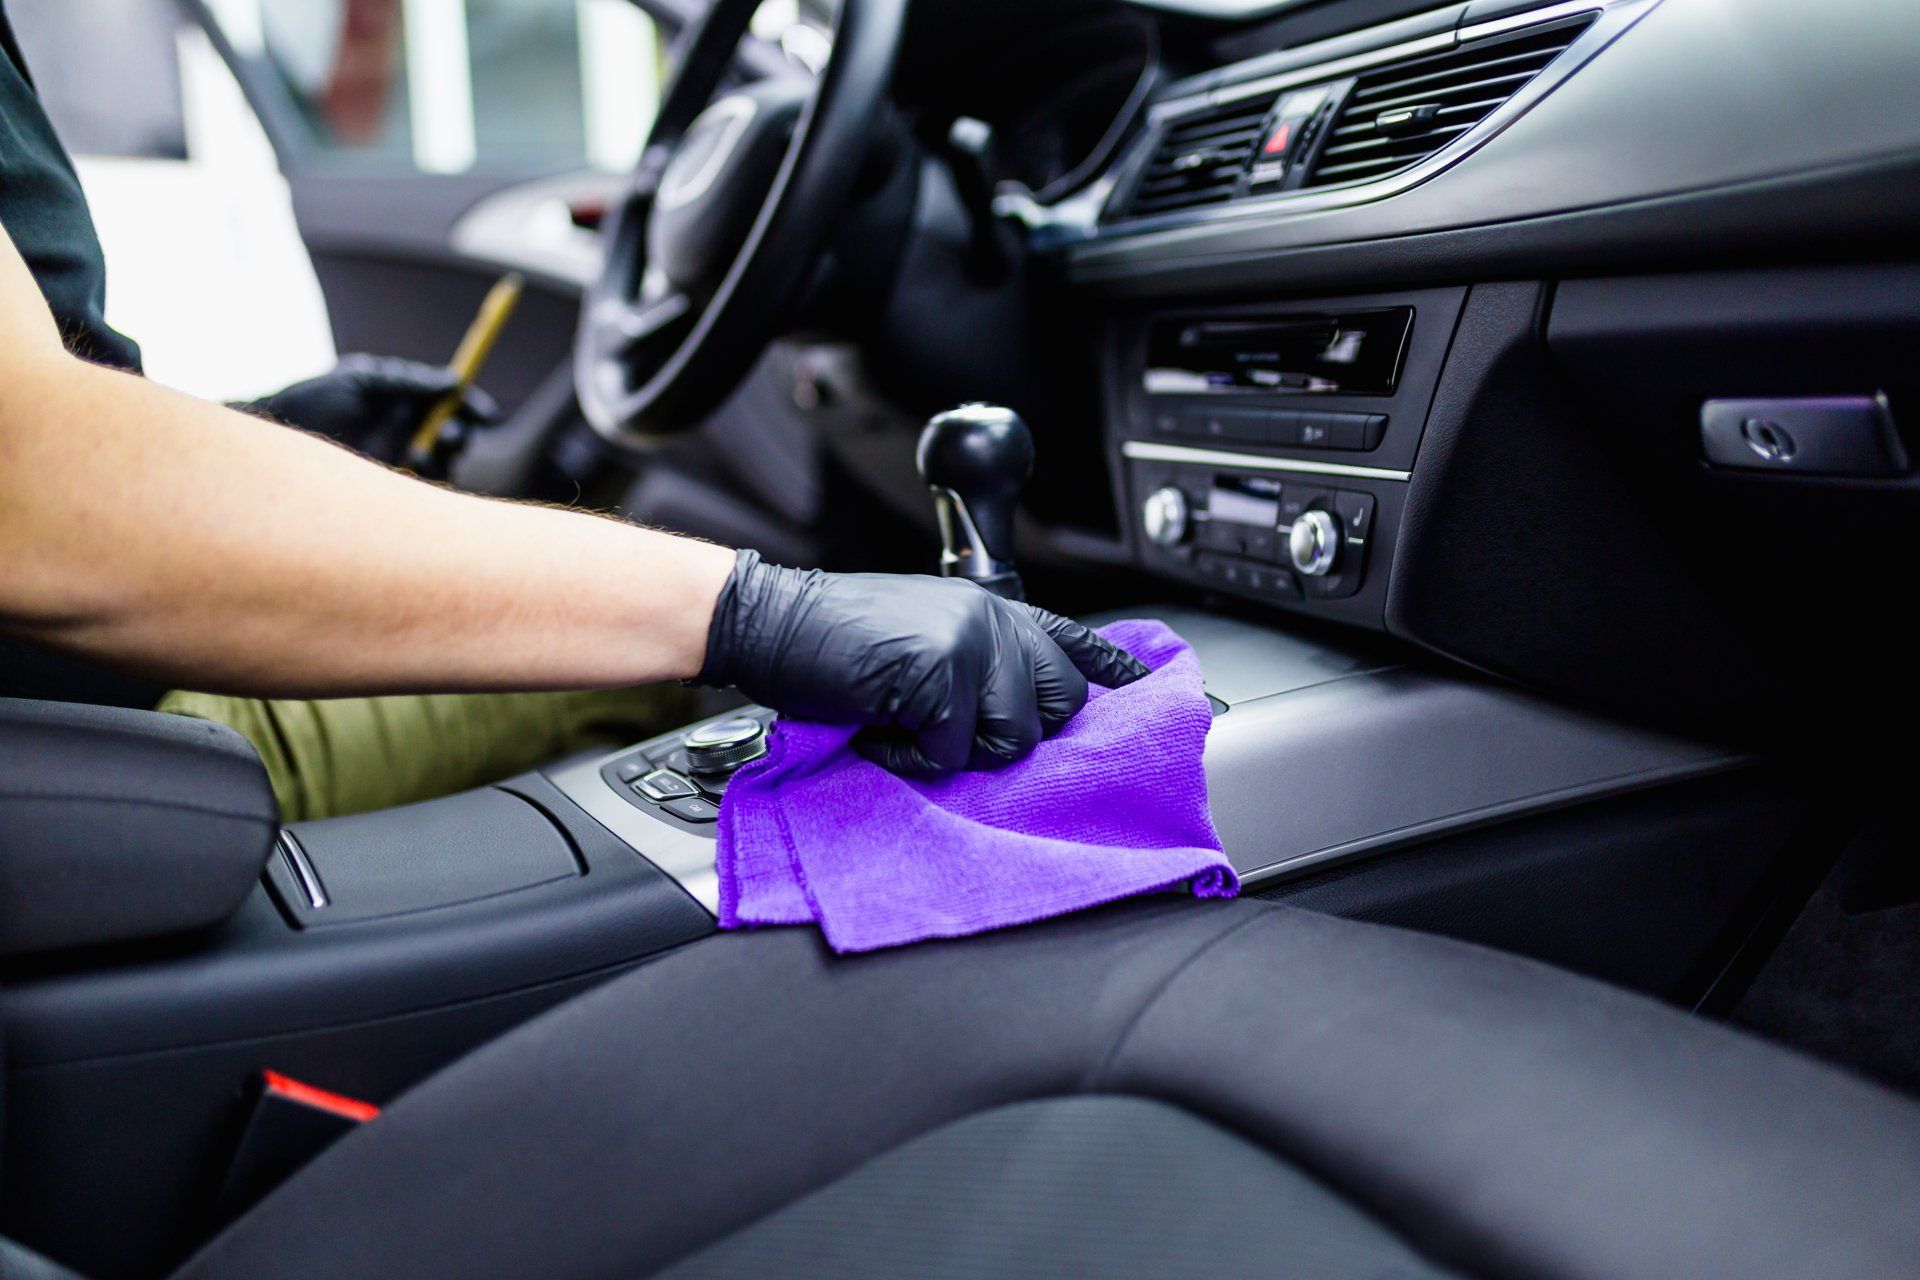 Stock Photo A Man Cleaning Car Interior Car Detailing Or Valeting Concept Selective Focus 743191834 1920w 